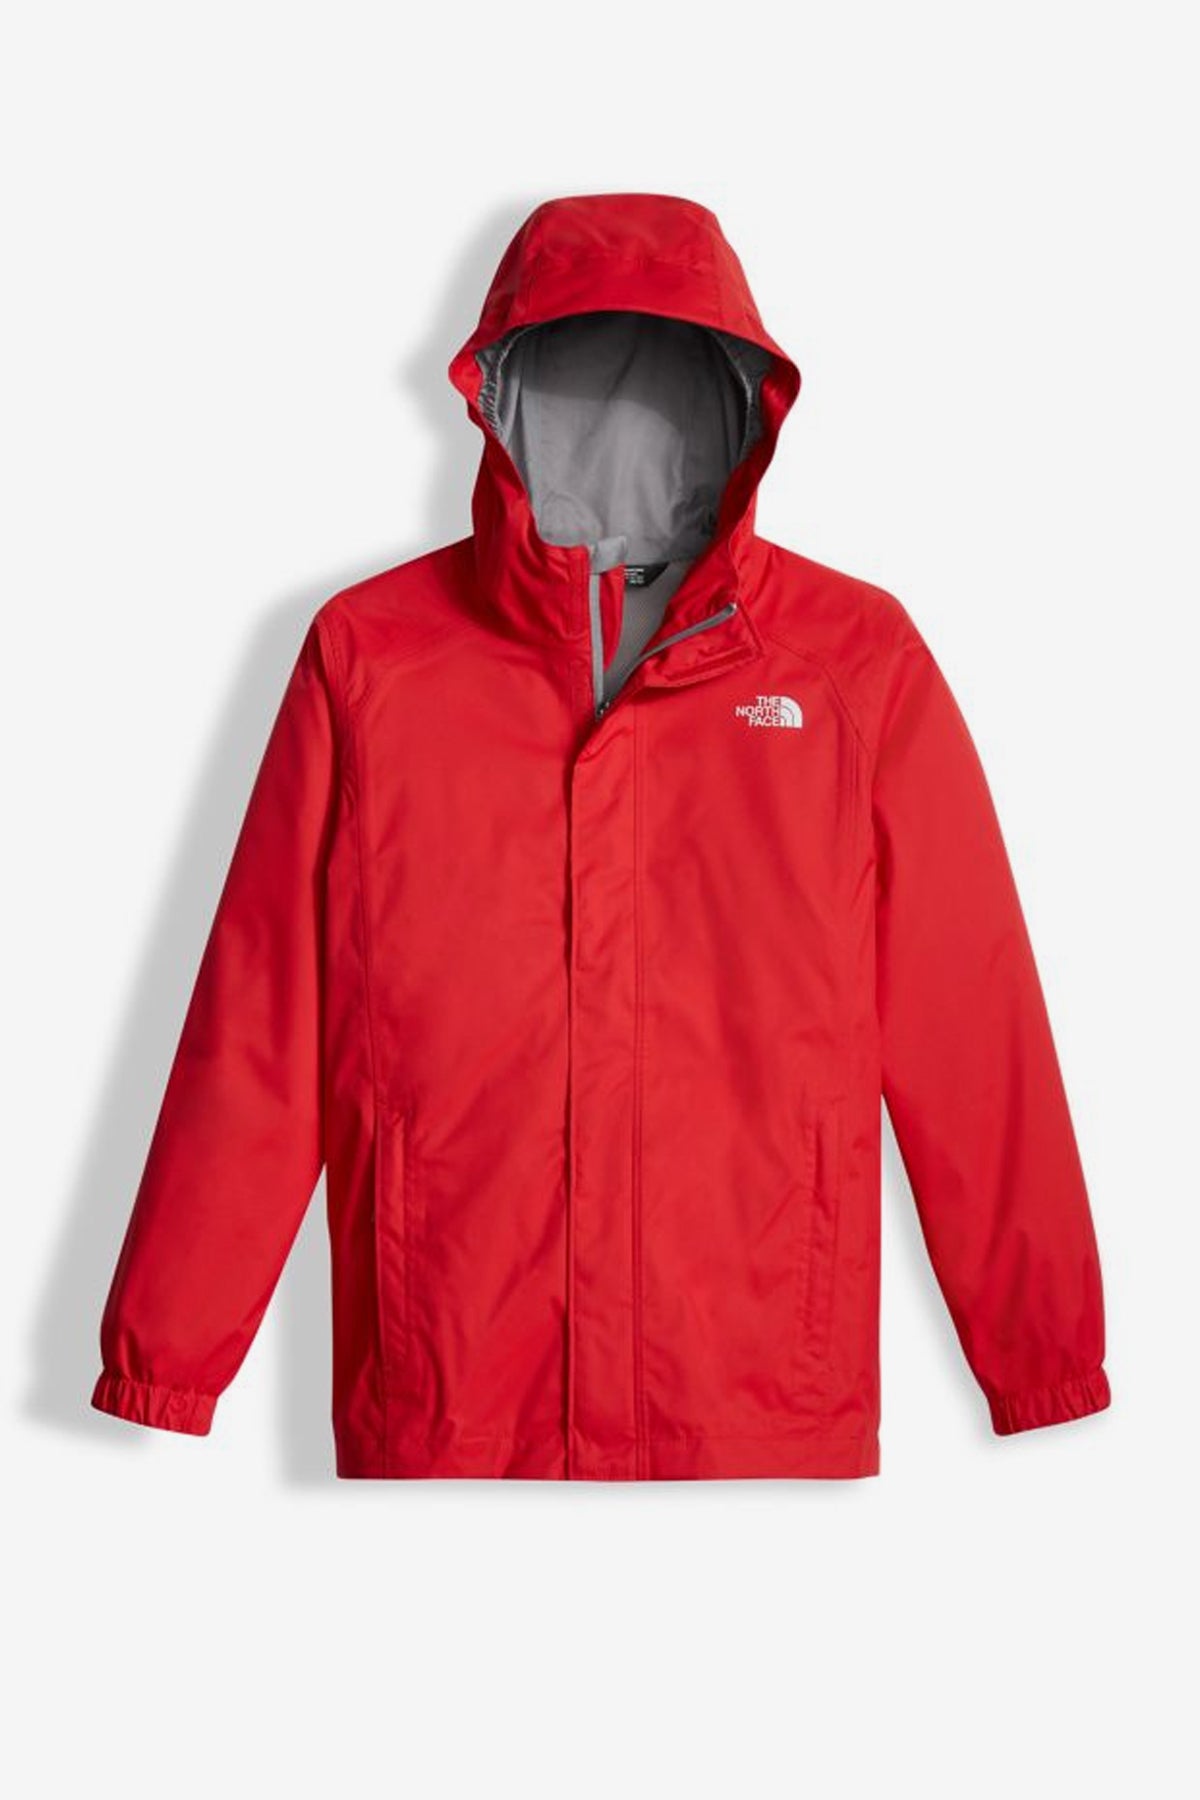 north face red waterproof jacket